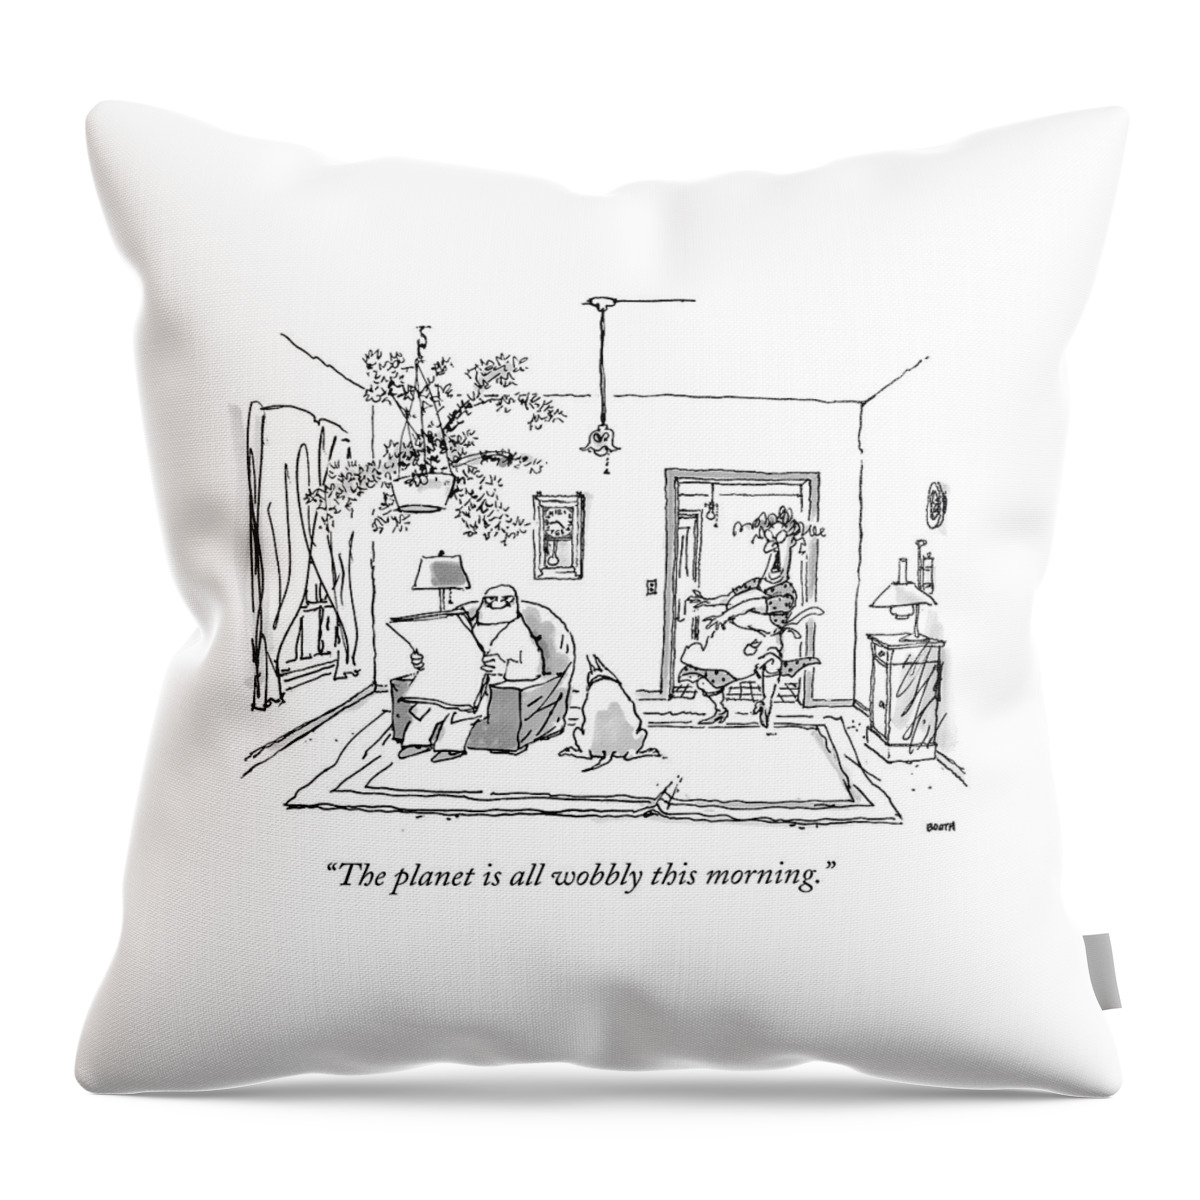 The Planet Is All Wobbly This Morning Throw Pillow